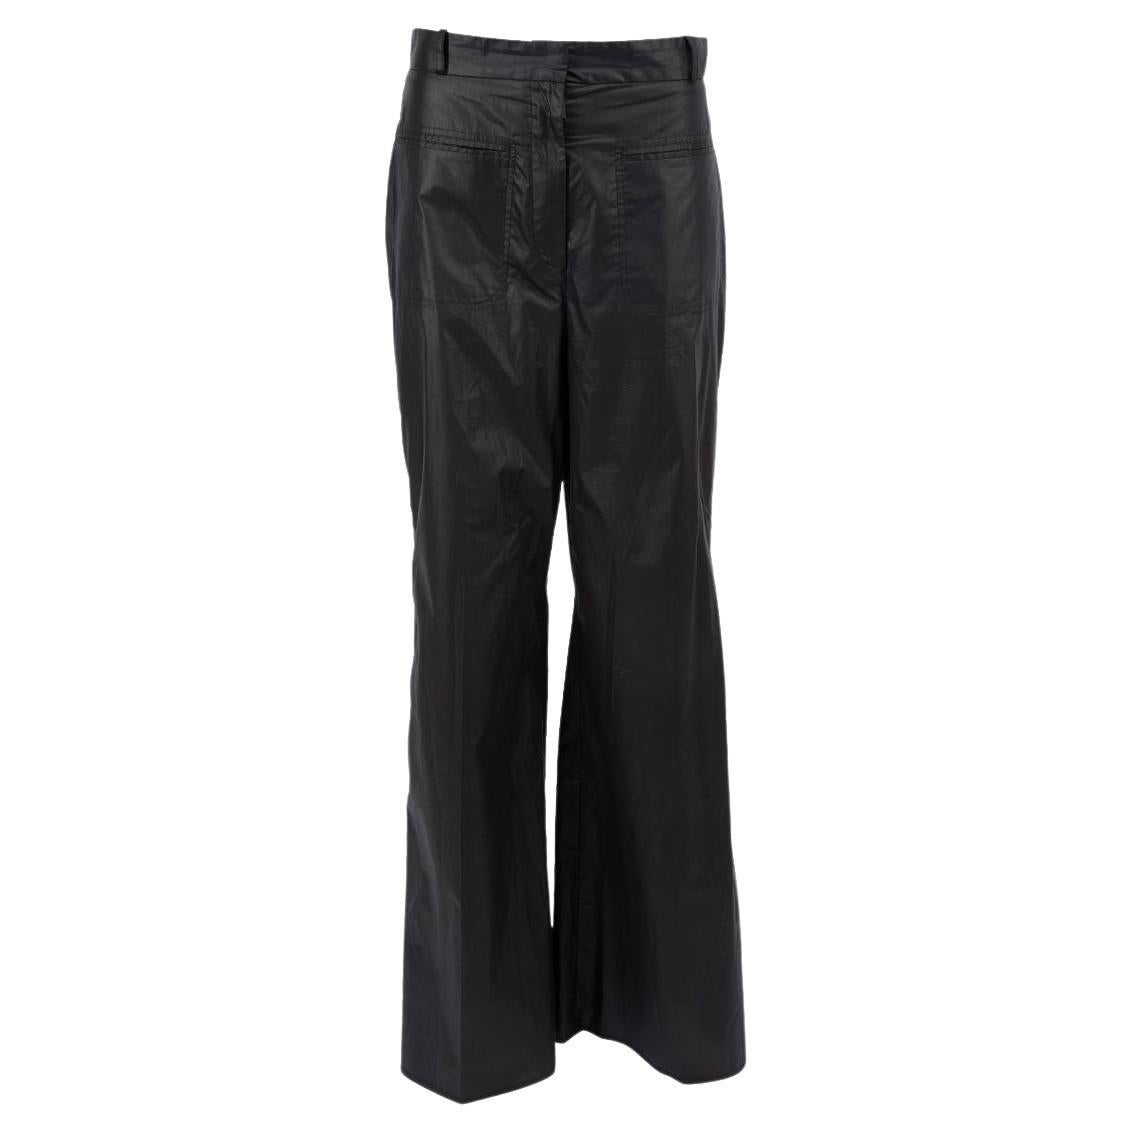 Pre-Loved Christopher Kane Women's Black Trousers with Diamanté Detail For Sale